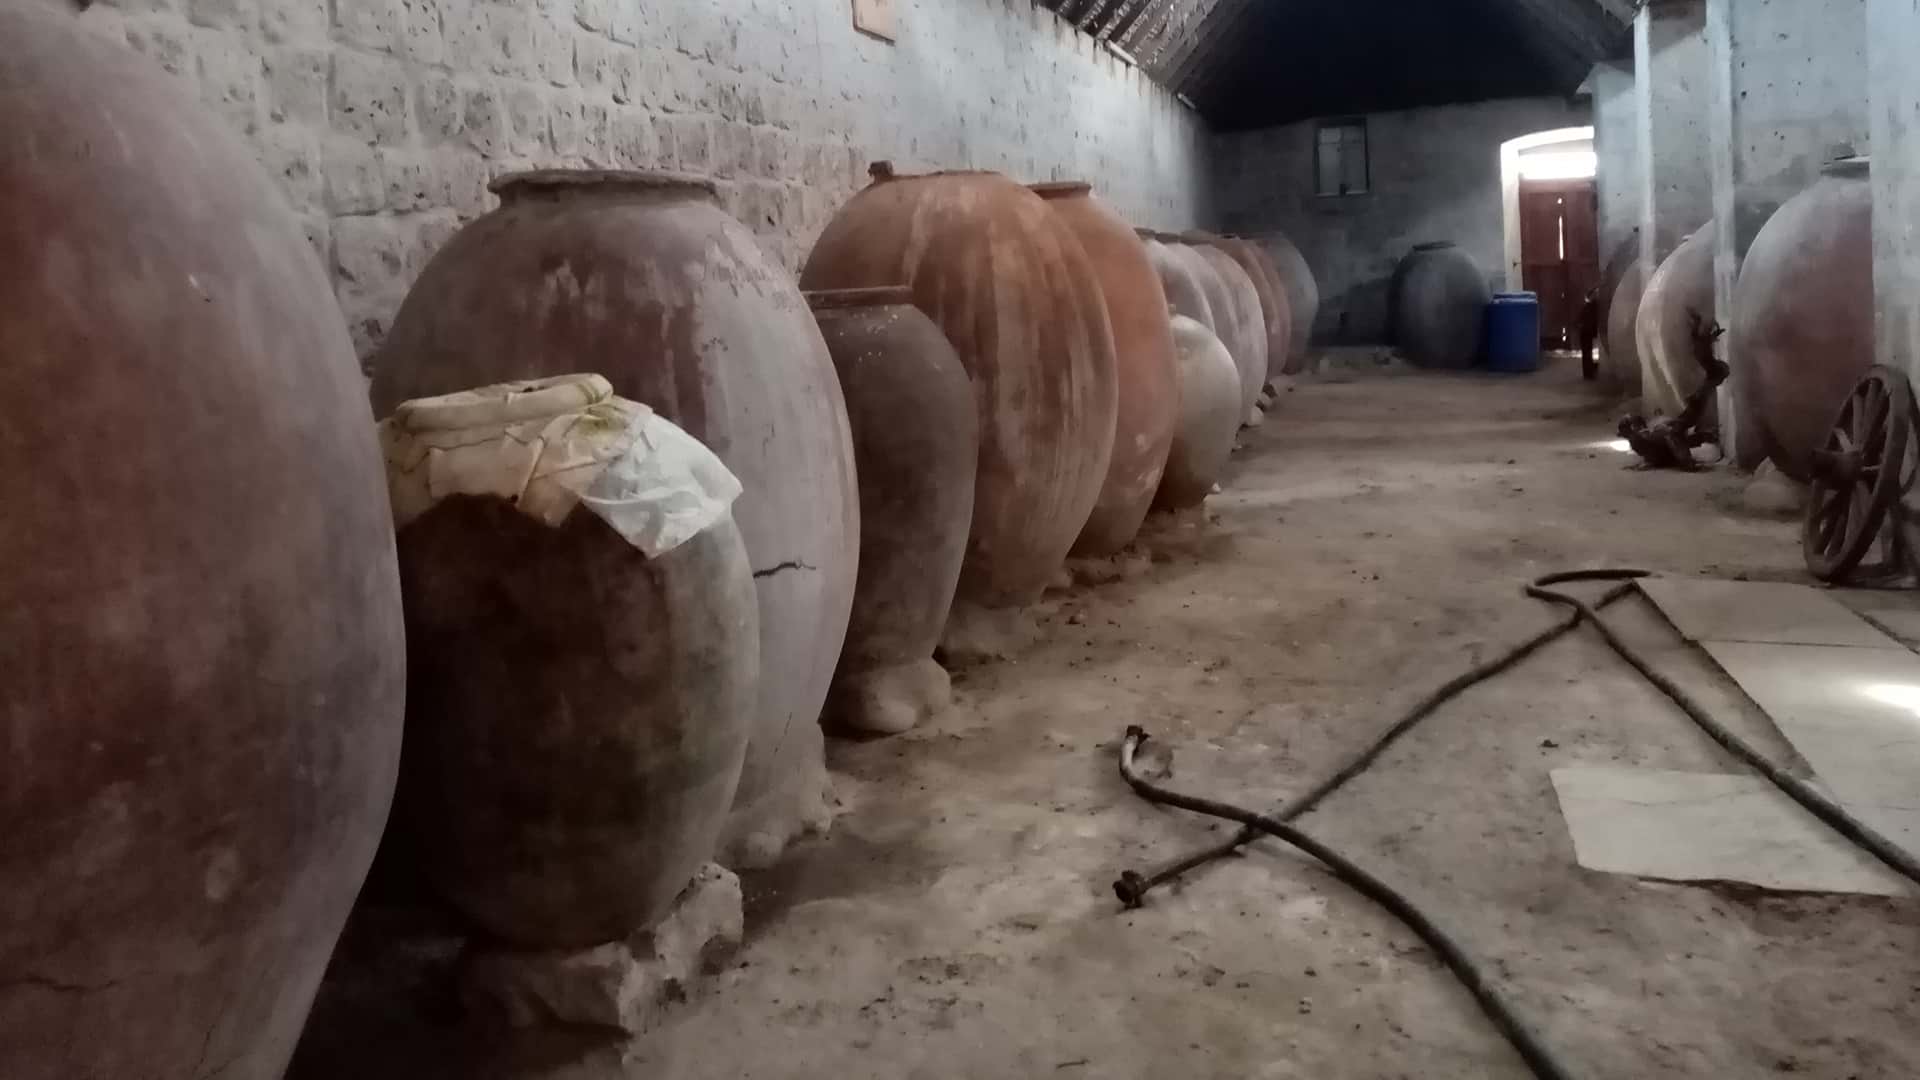 11Large clay jars on a dirt floor storage facility seen during a tour with Responsible Travel Peru from Arequipa